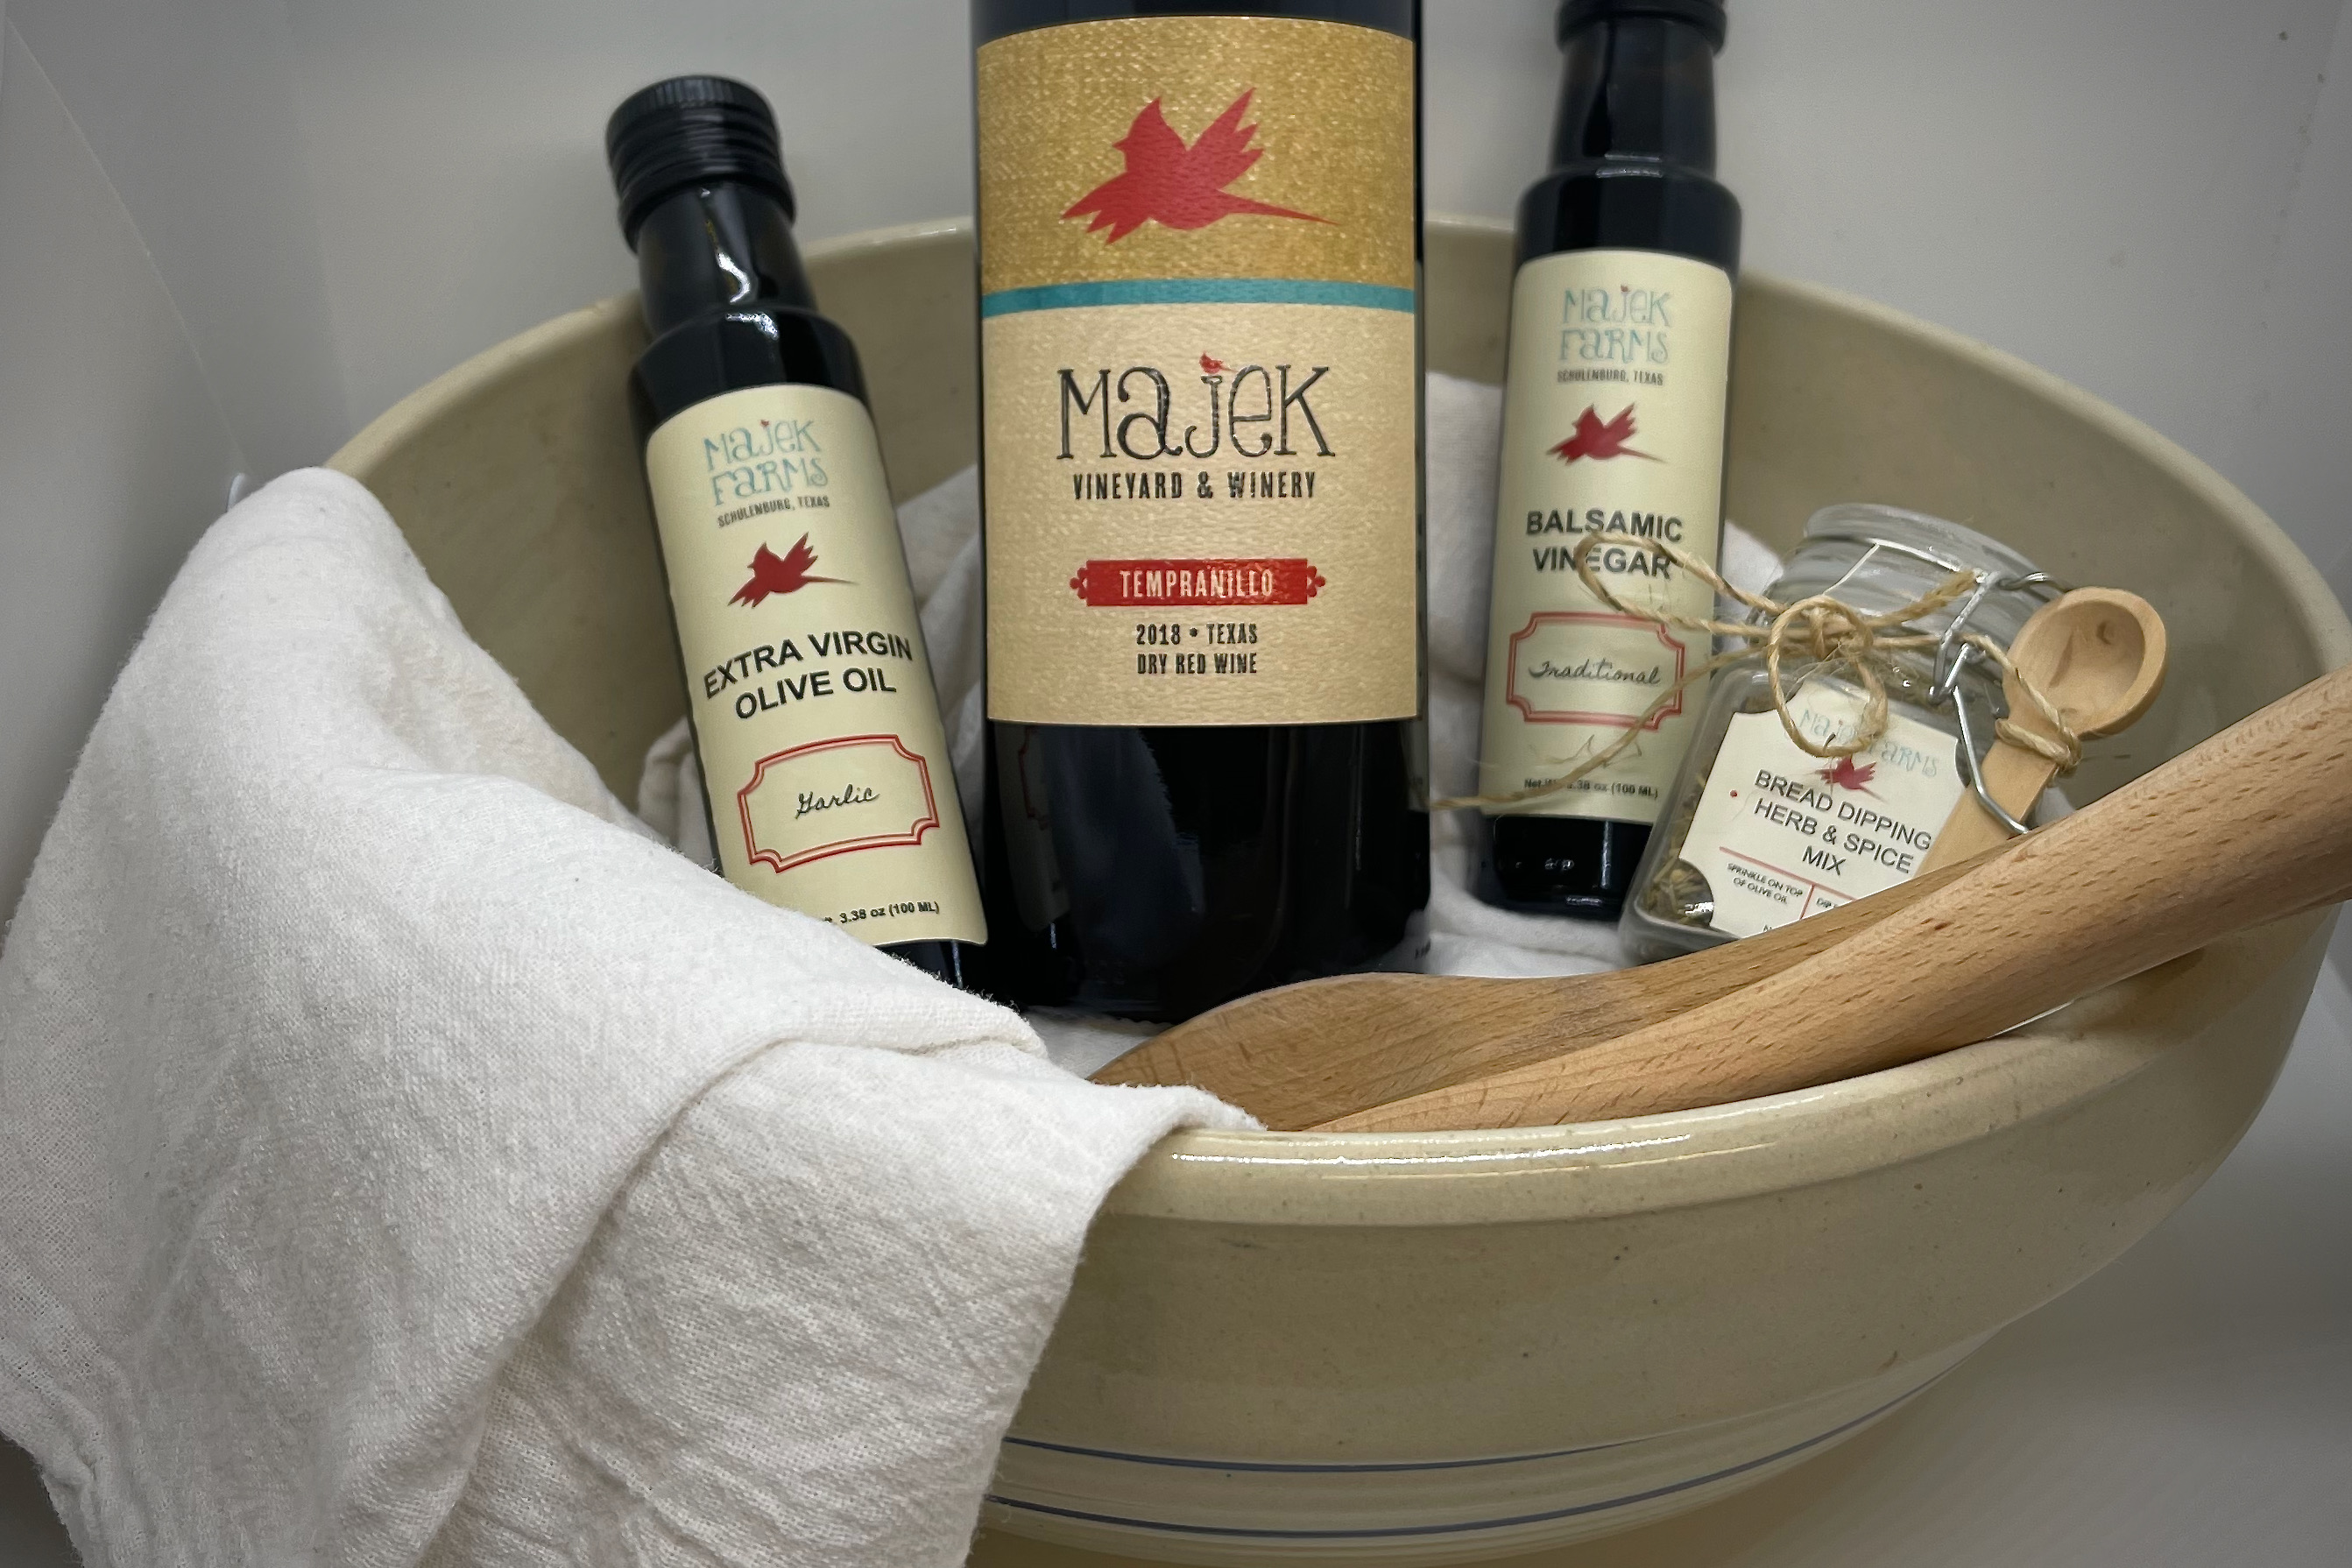 Mini bottles of olive oil, balsamic vinegar, a jar of dipping spice, and a bottle of red wine inside a big bowl with a white cloth.